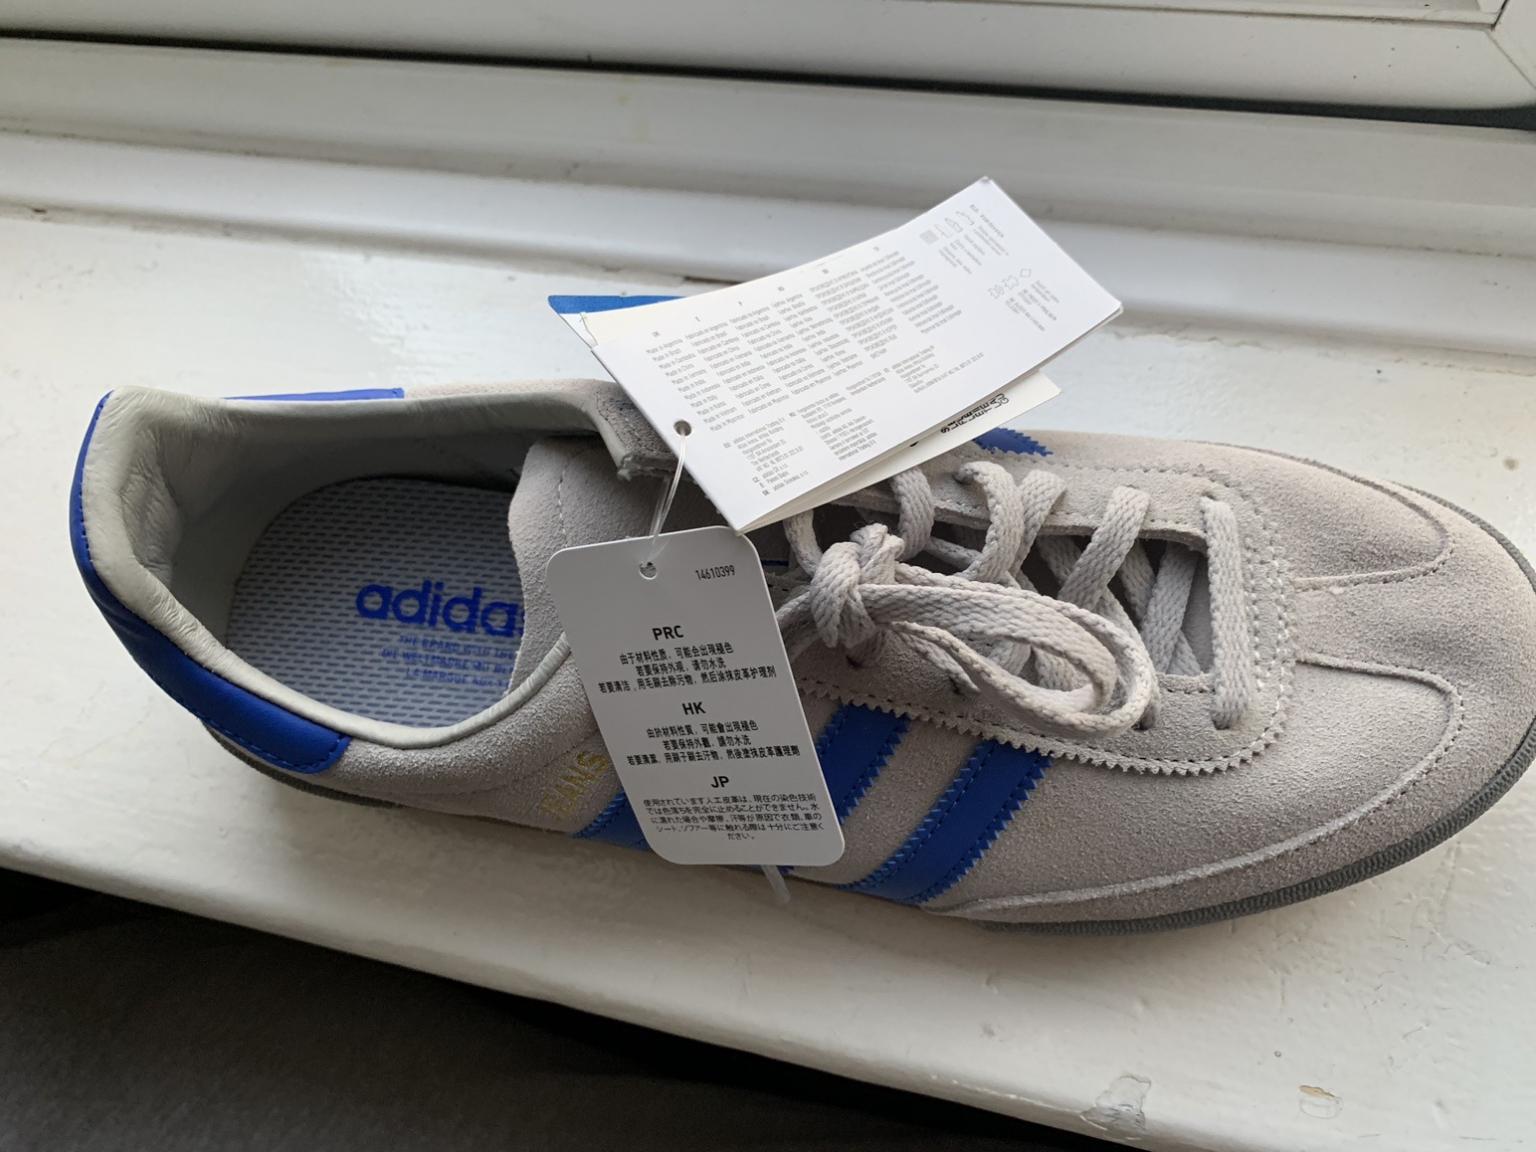 adidas jeans size 9